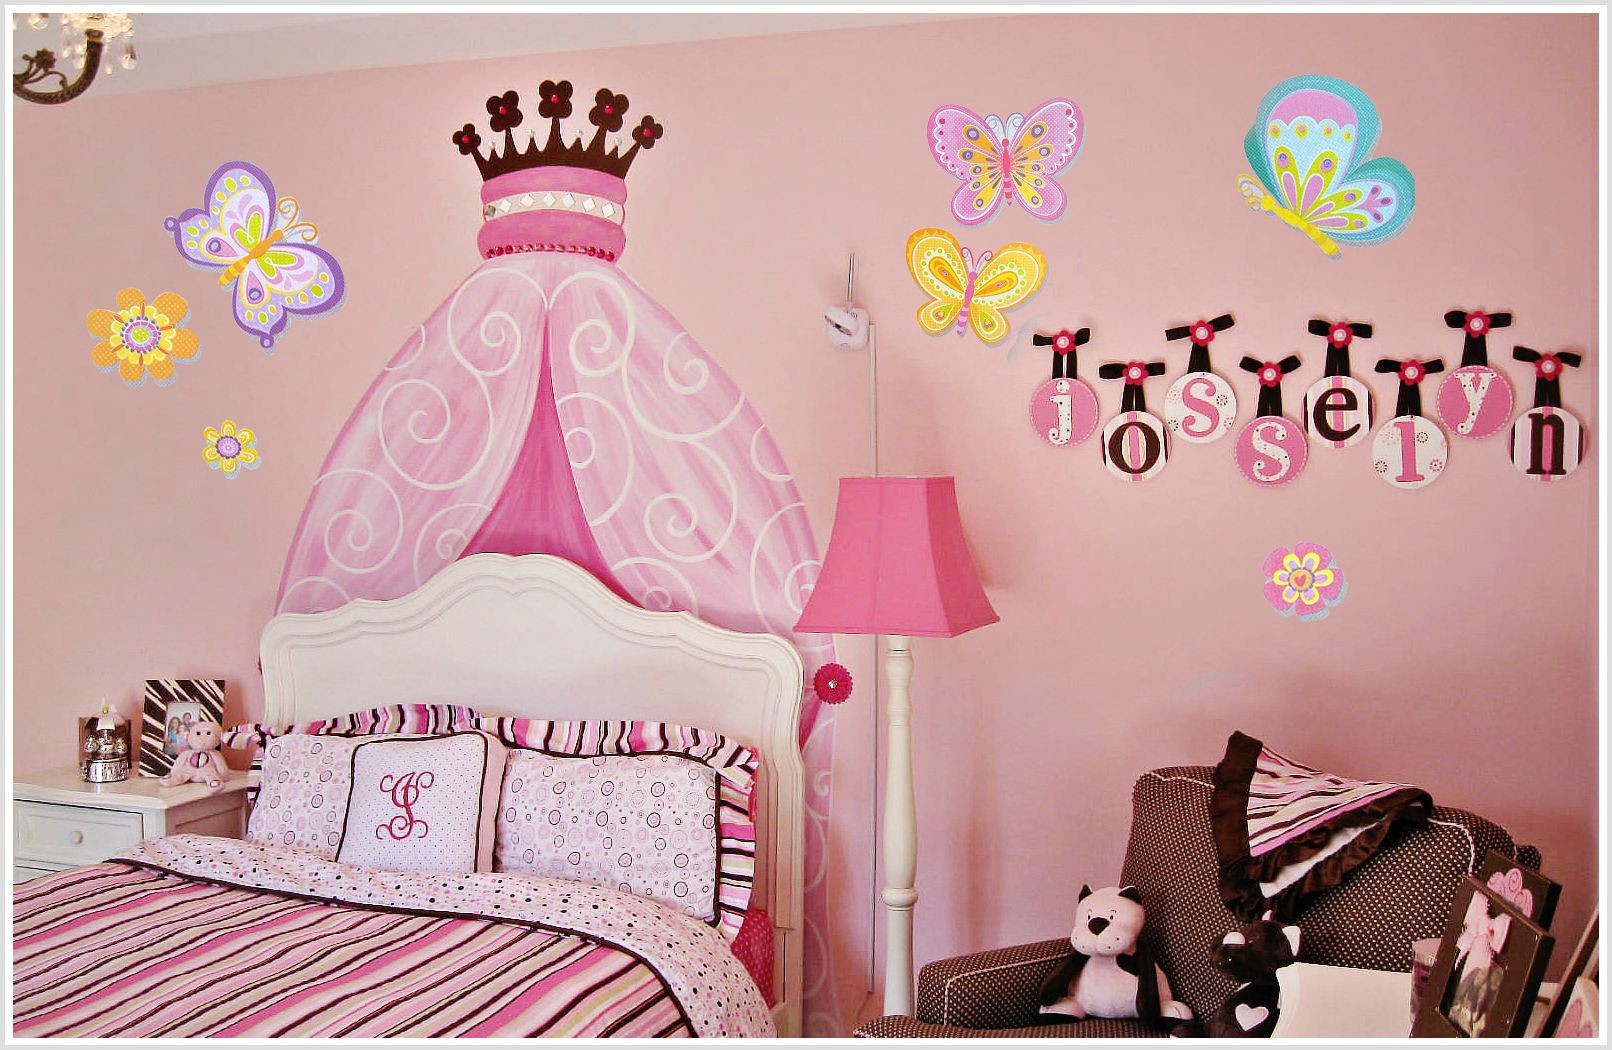 Girls Bedroom Wall Stickers
 Adorable Wall Stickers for Girl Bedrooms